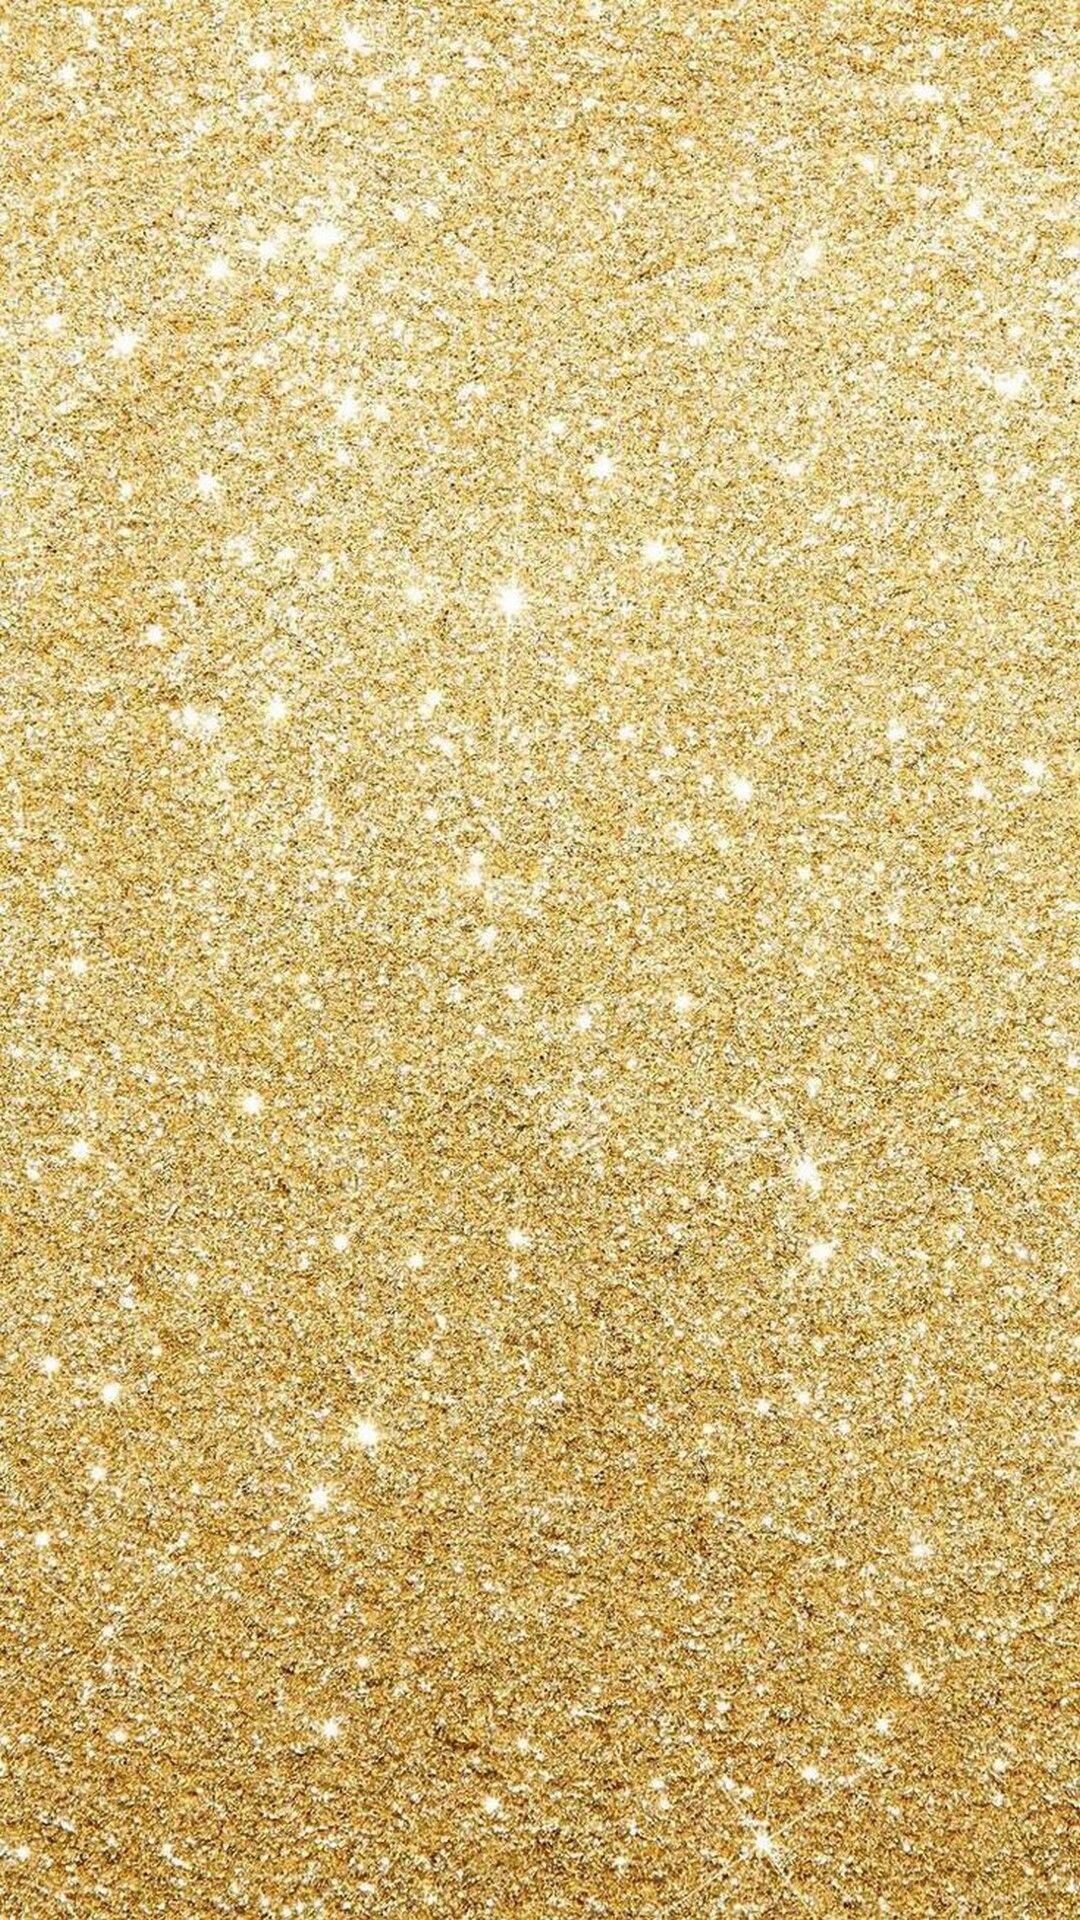 Gold Glitter: Shiny sands made of precious, rare, and soft metal. 1080x1920 Full HD Wallpaper.